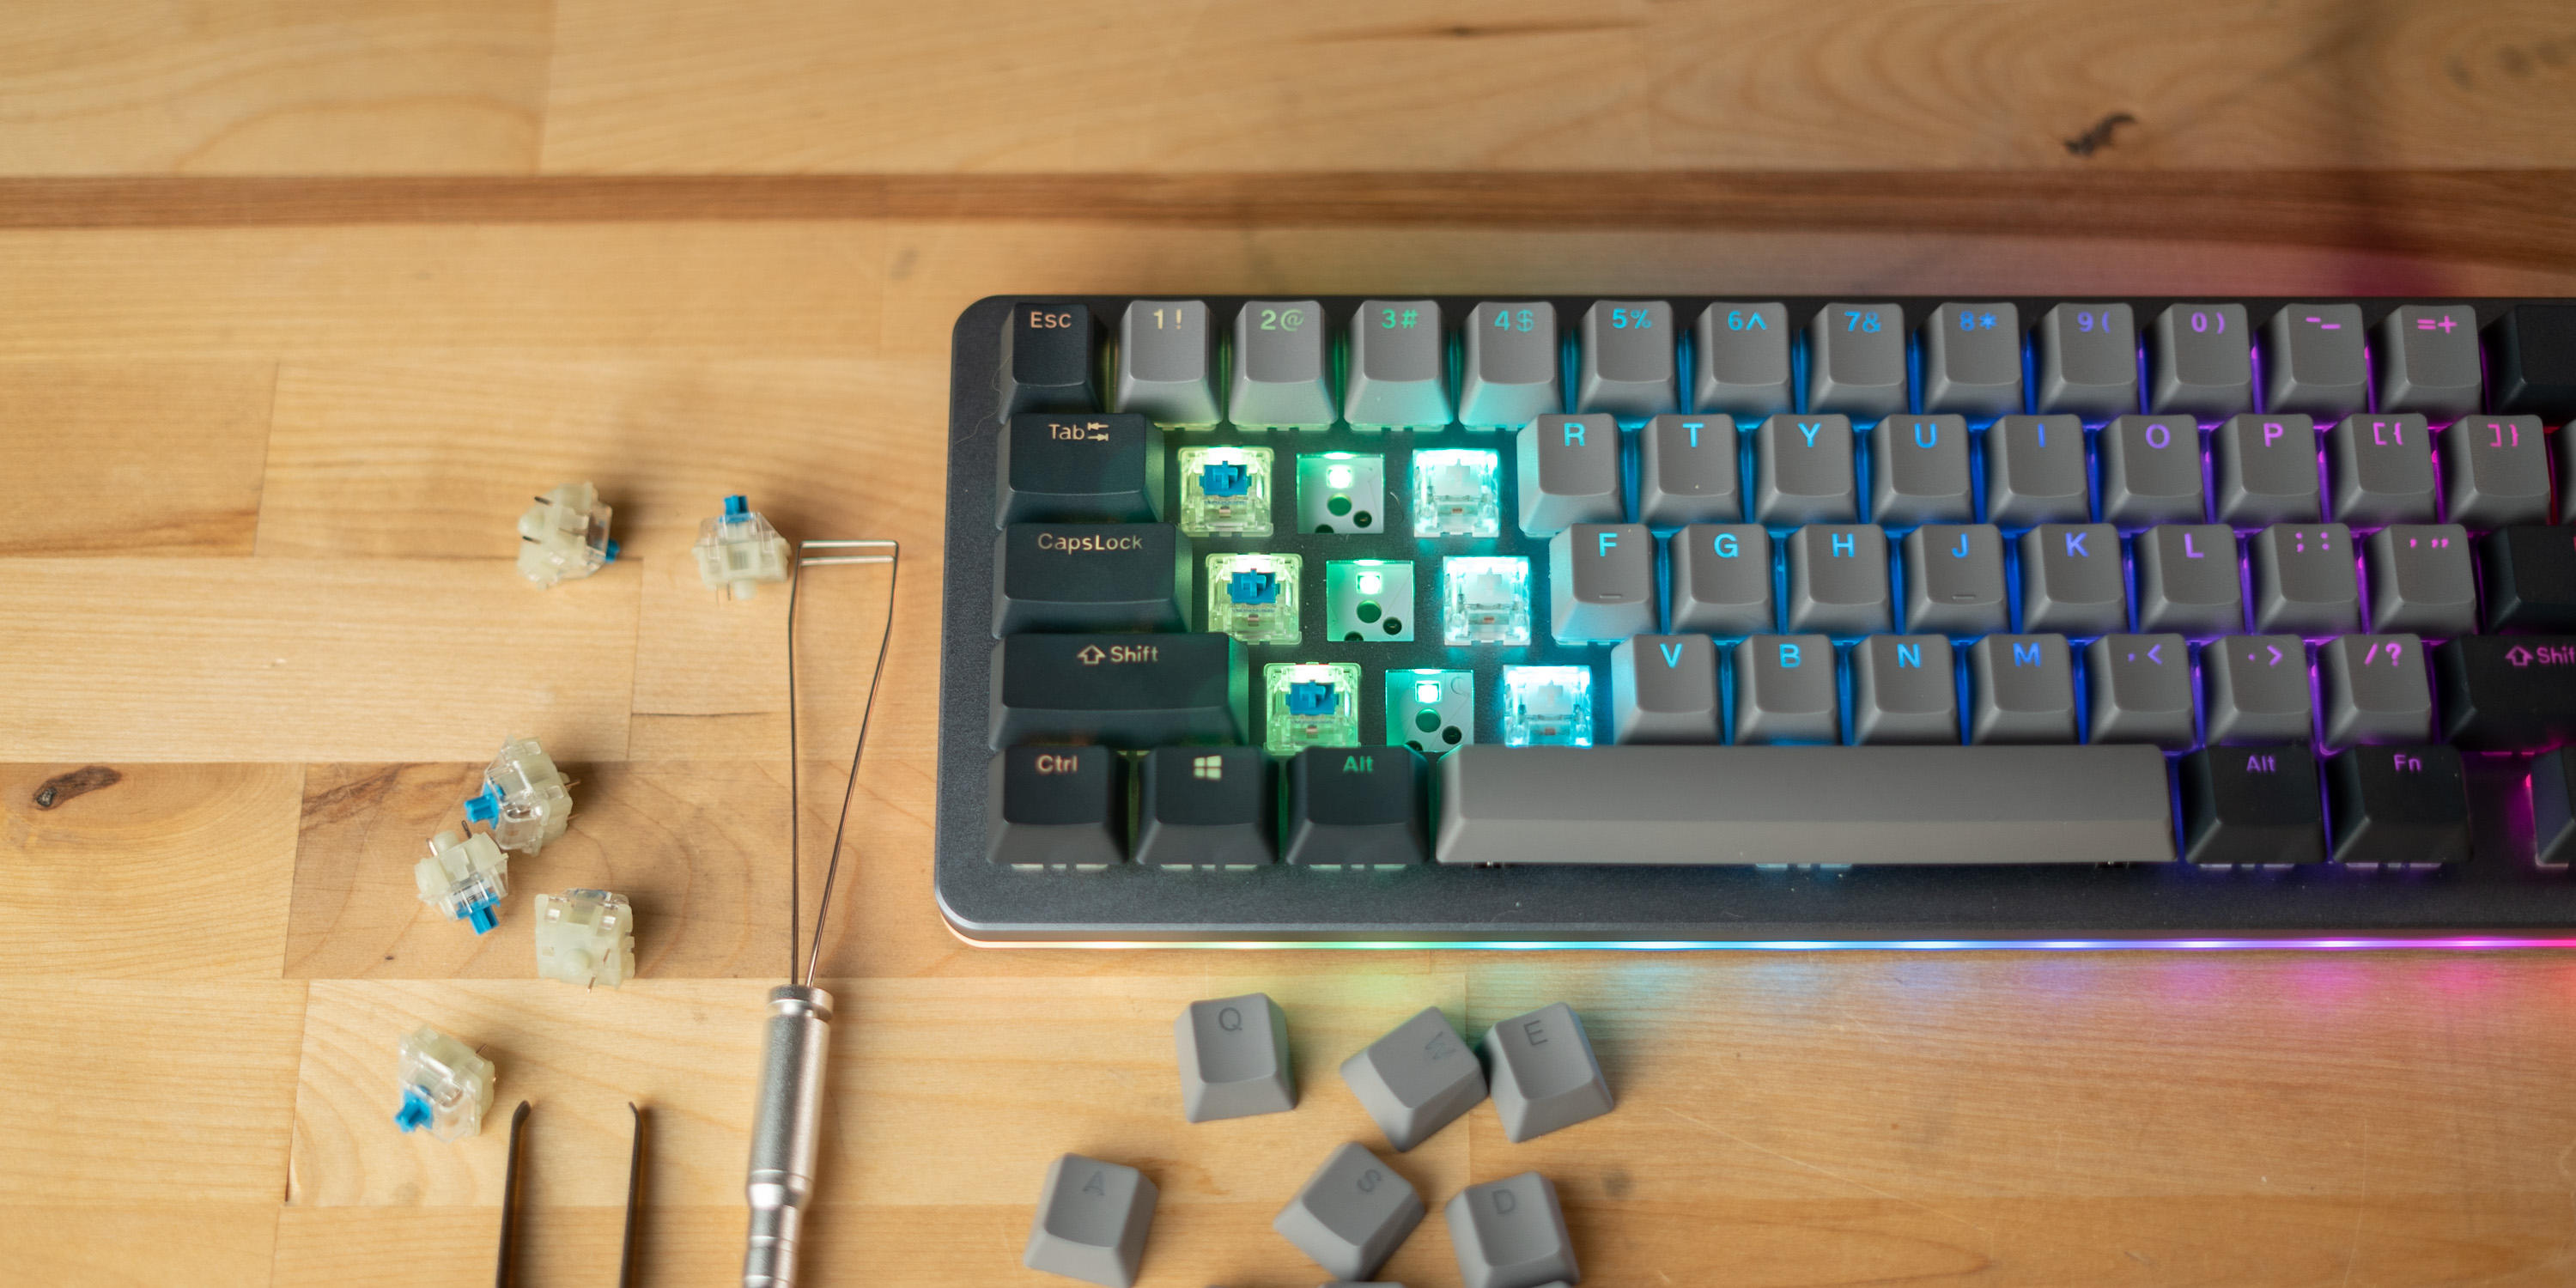 swapping switches on the Drop ALT keyboard